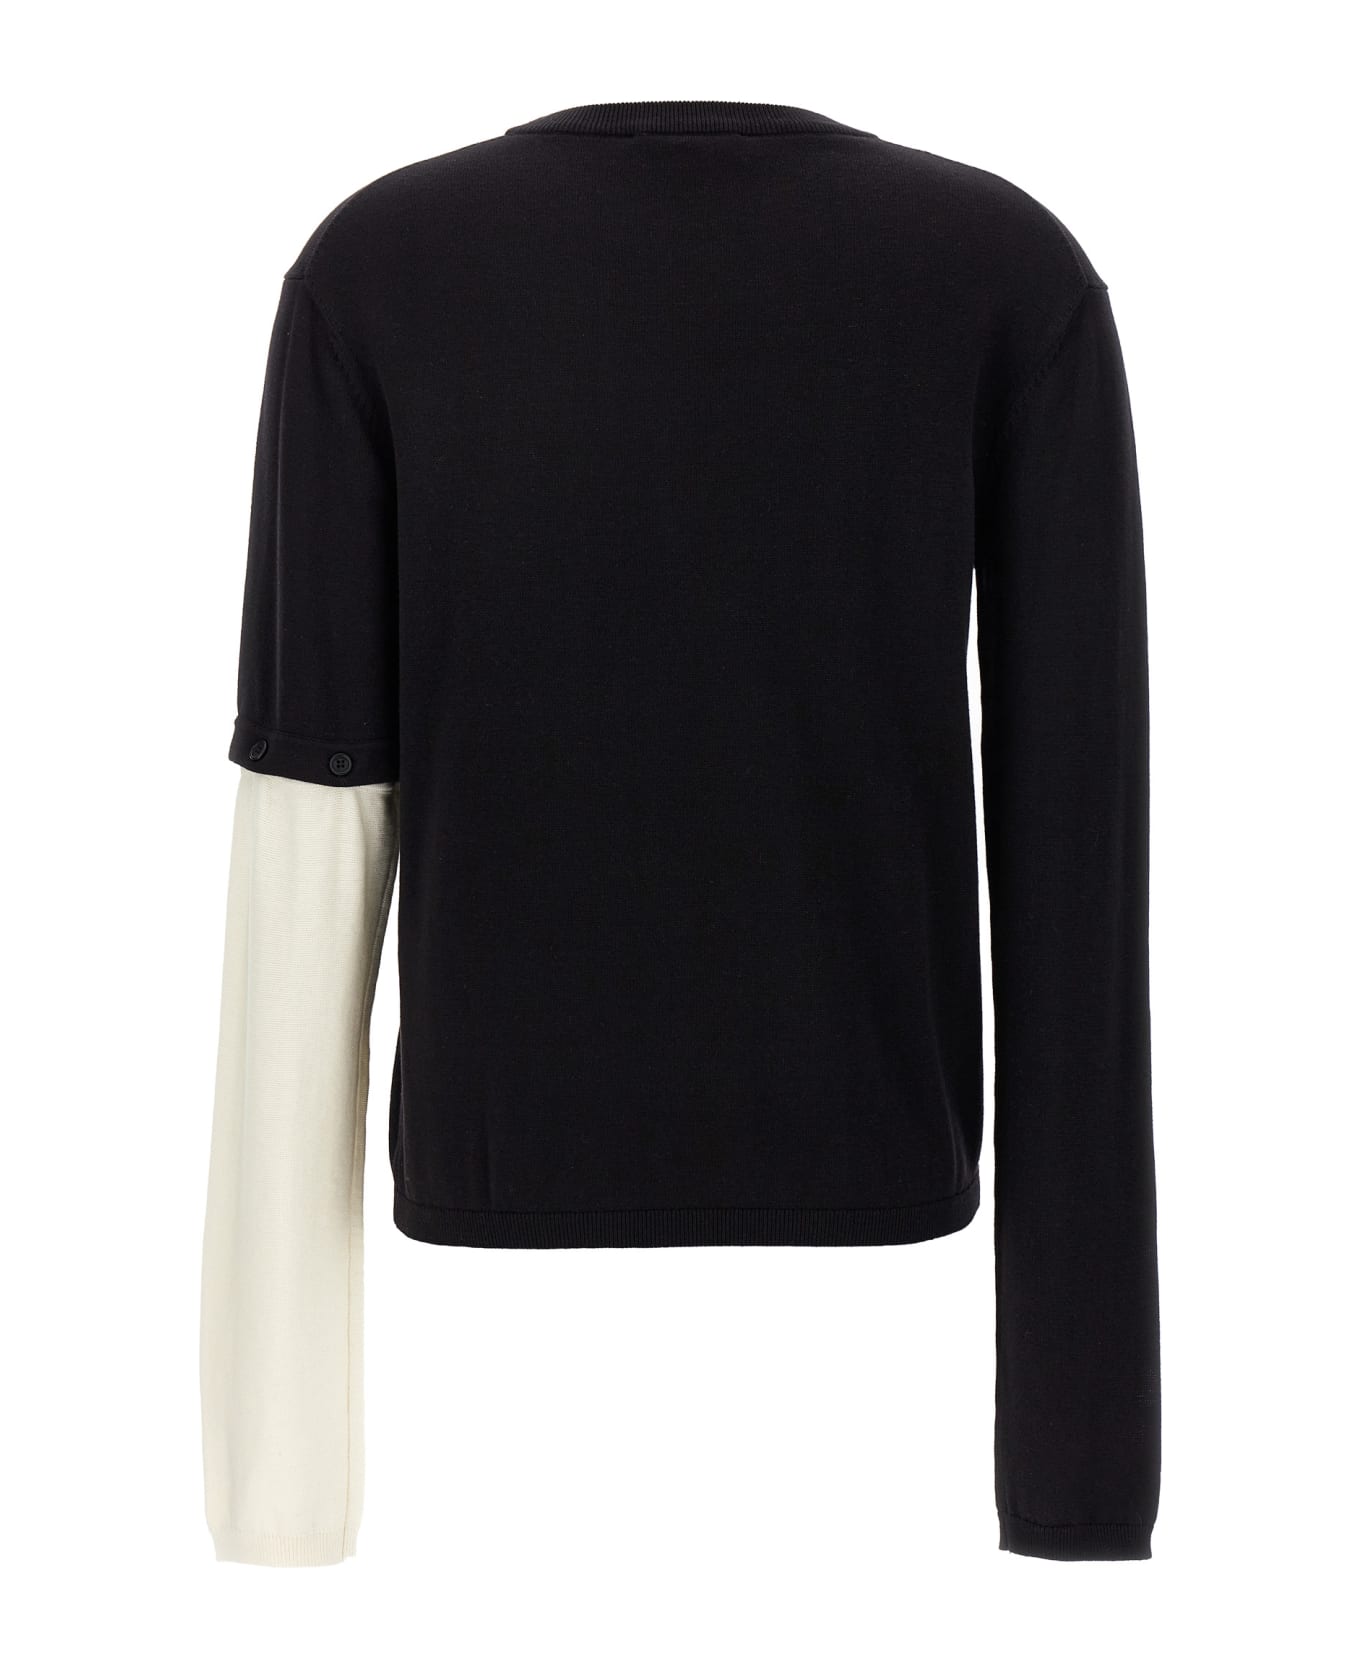 J.W. Anderson Removable Sleeve Sweater - White/Black